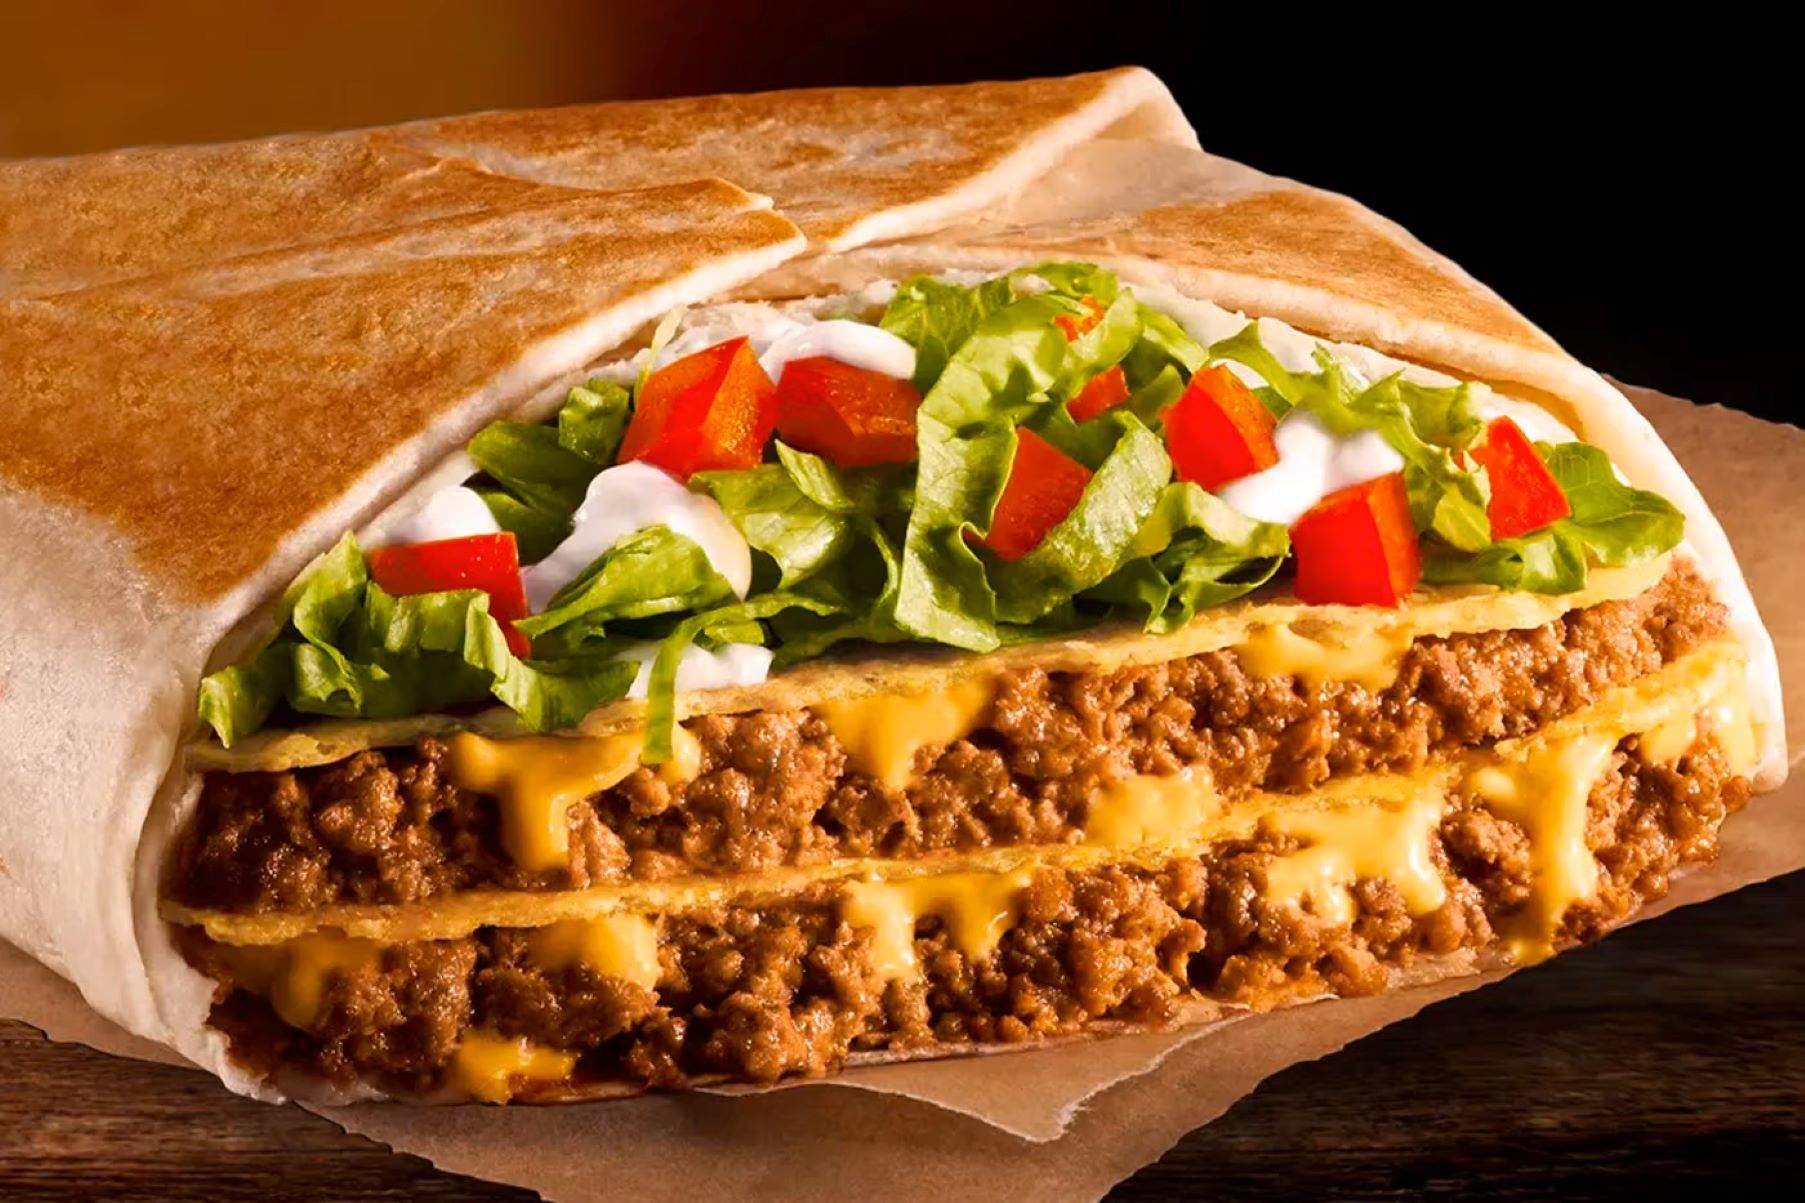 19-taco-bell-triple-double-crunchwrap-box-nutrition-facts